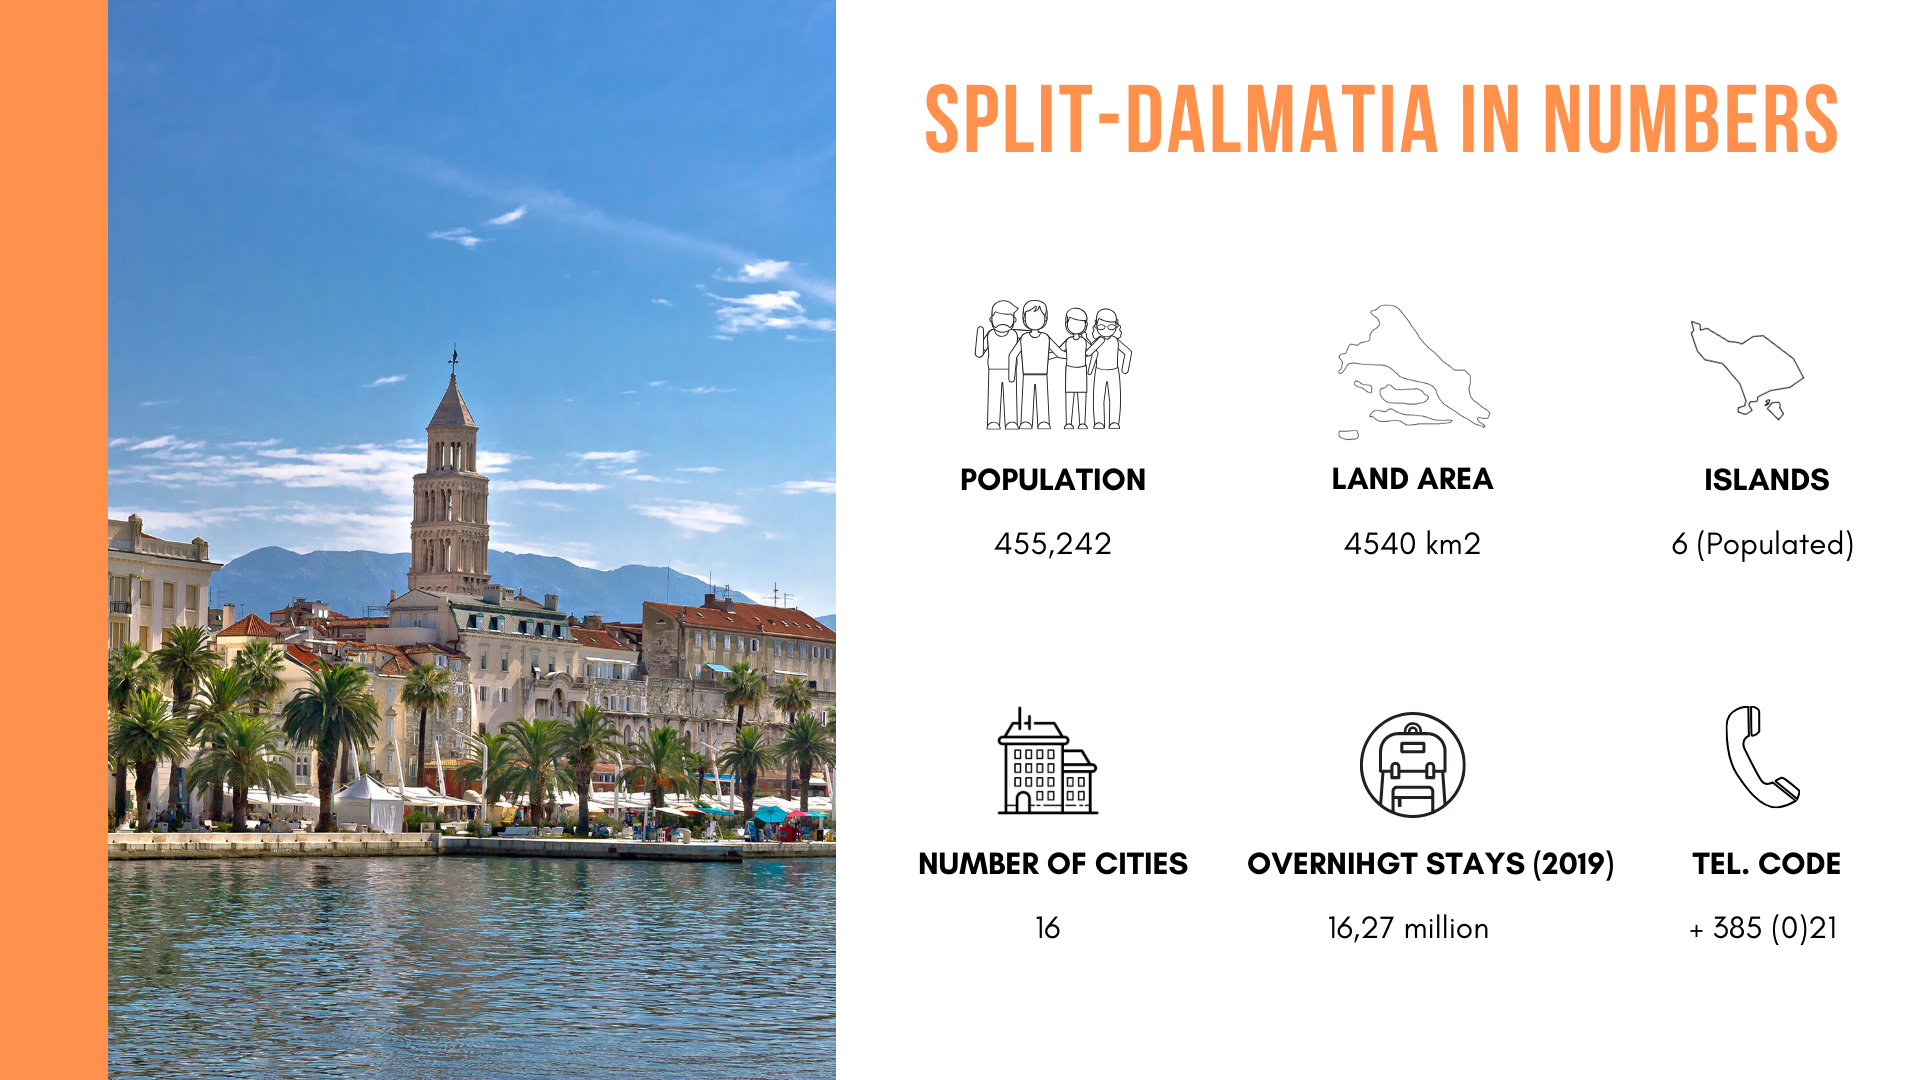 The infographic with data about basic information in Split-Dalmatia region.